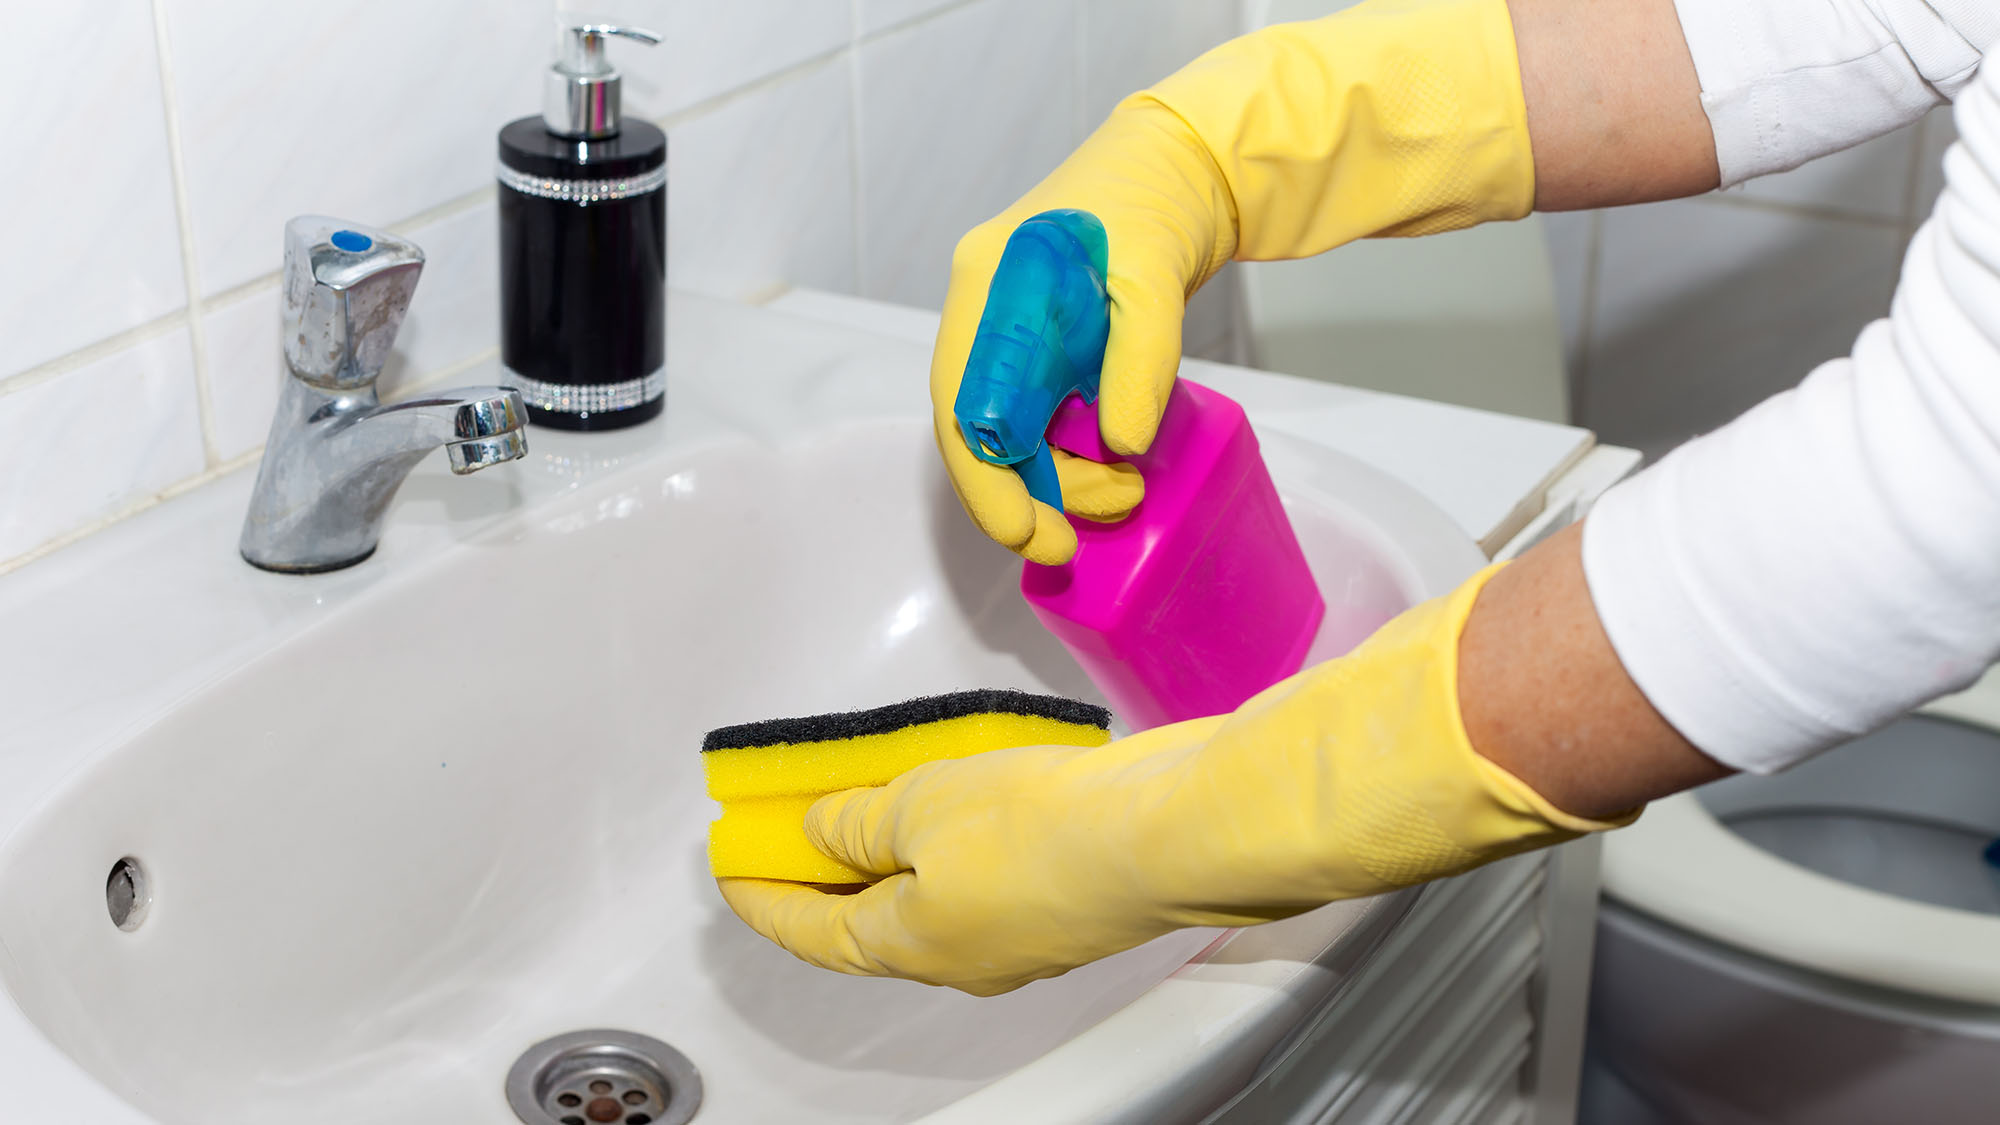 How Often Should You Clean Your Bathroom?